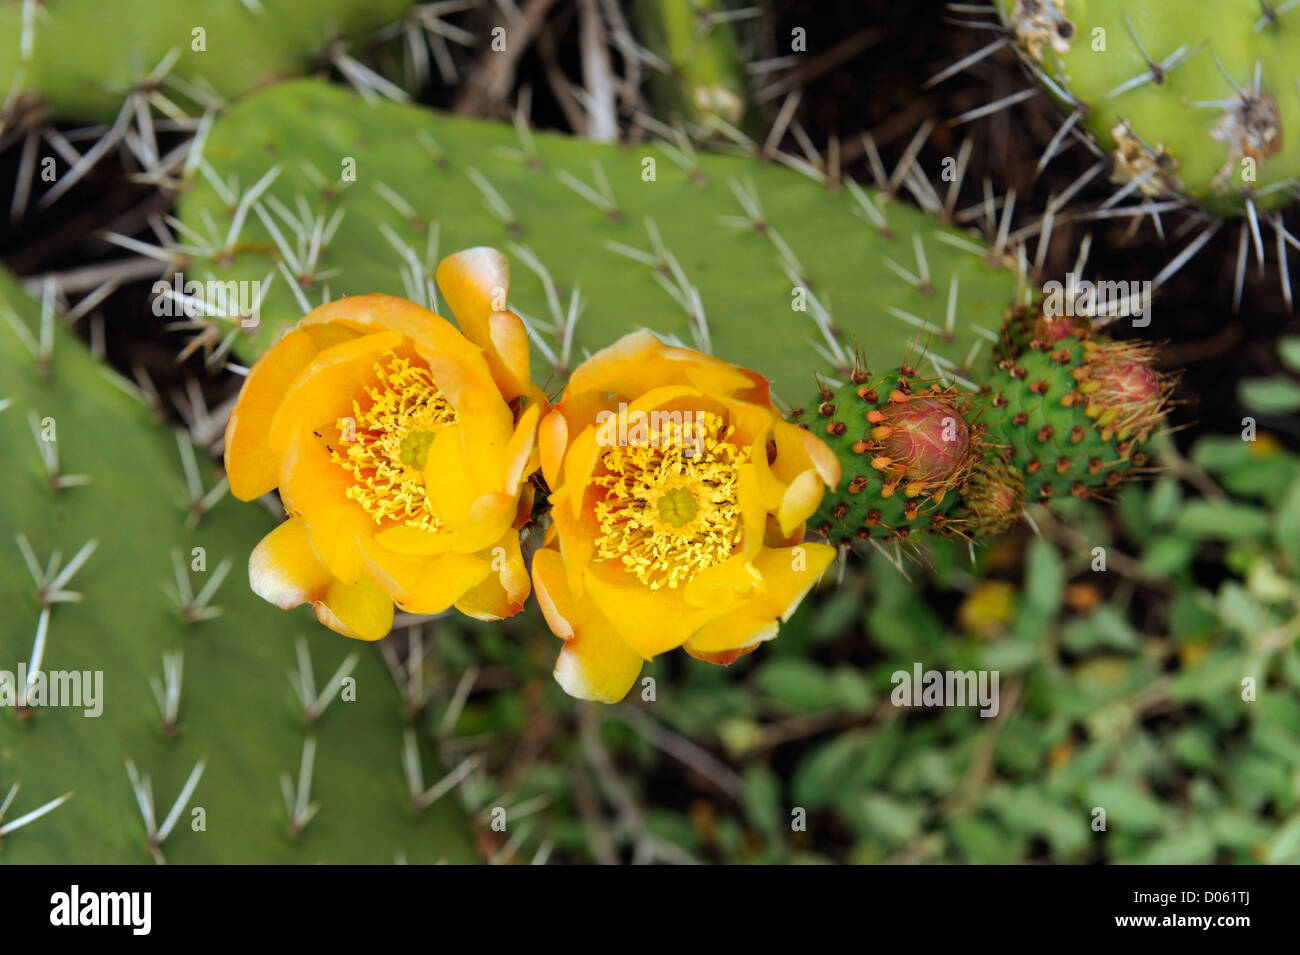 Yellow flowers blooming on a cactus Stock Photo